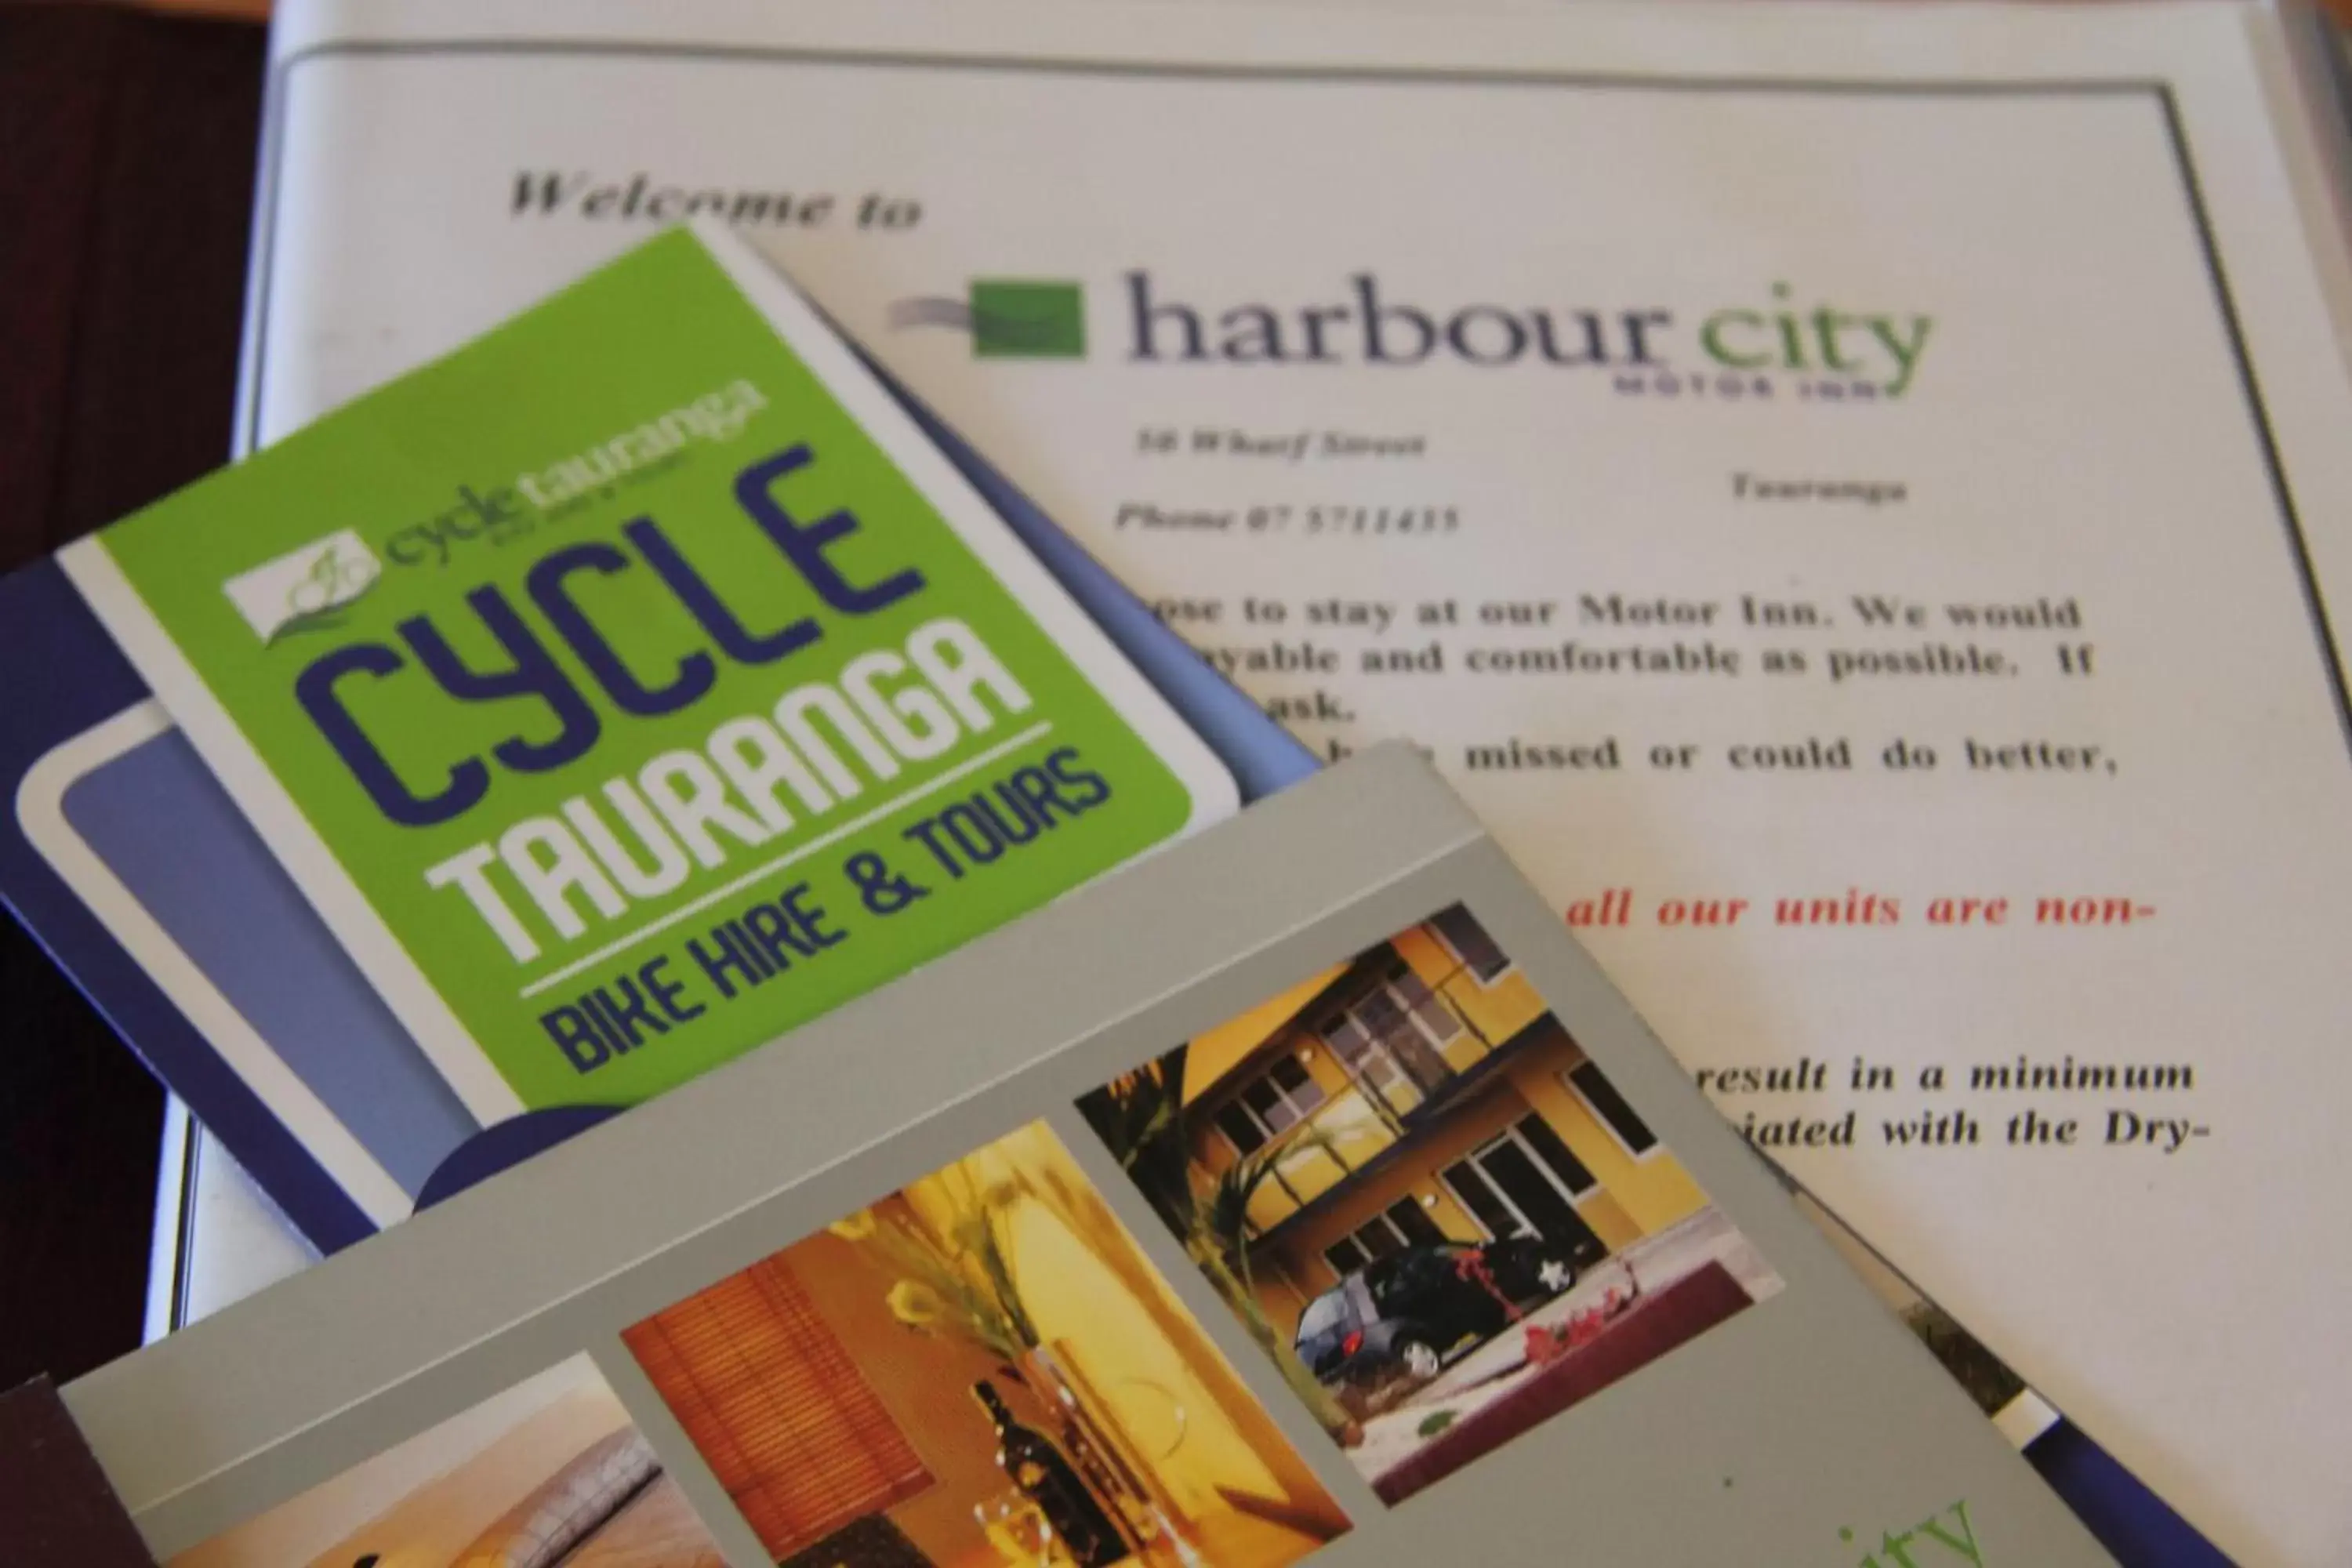 Cycling in Harbour City Motor Inn & Conference